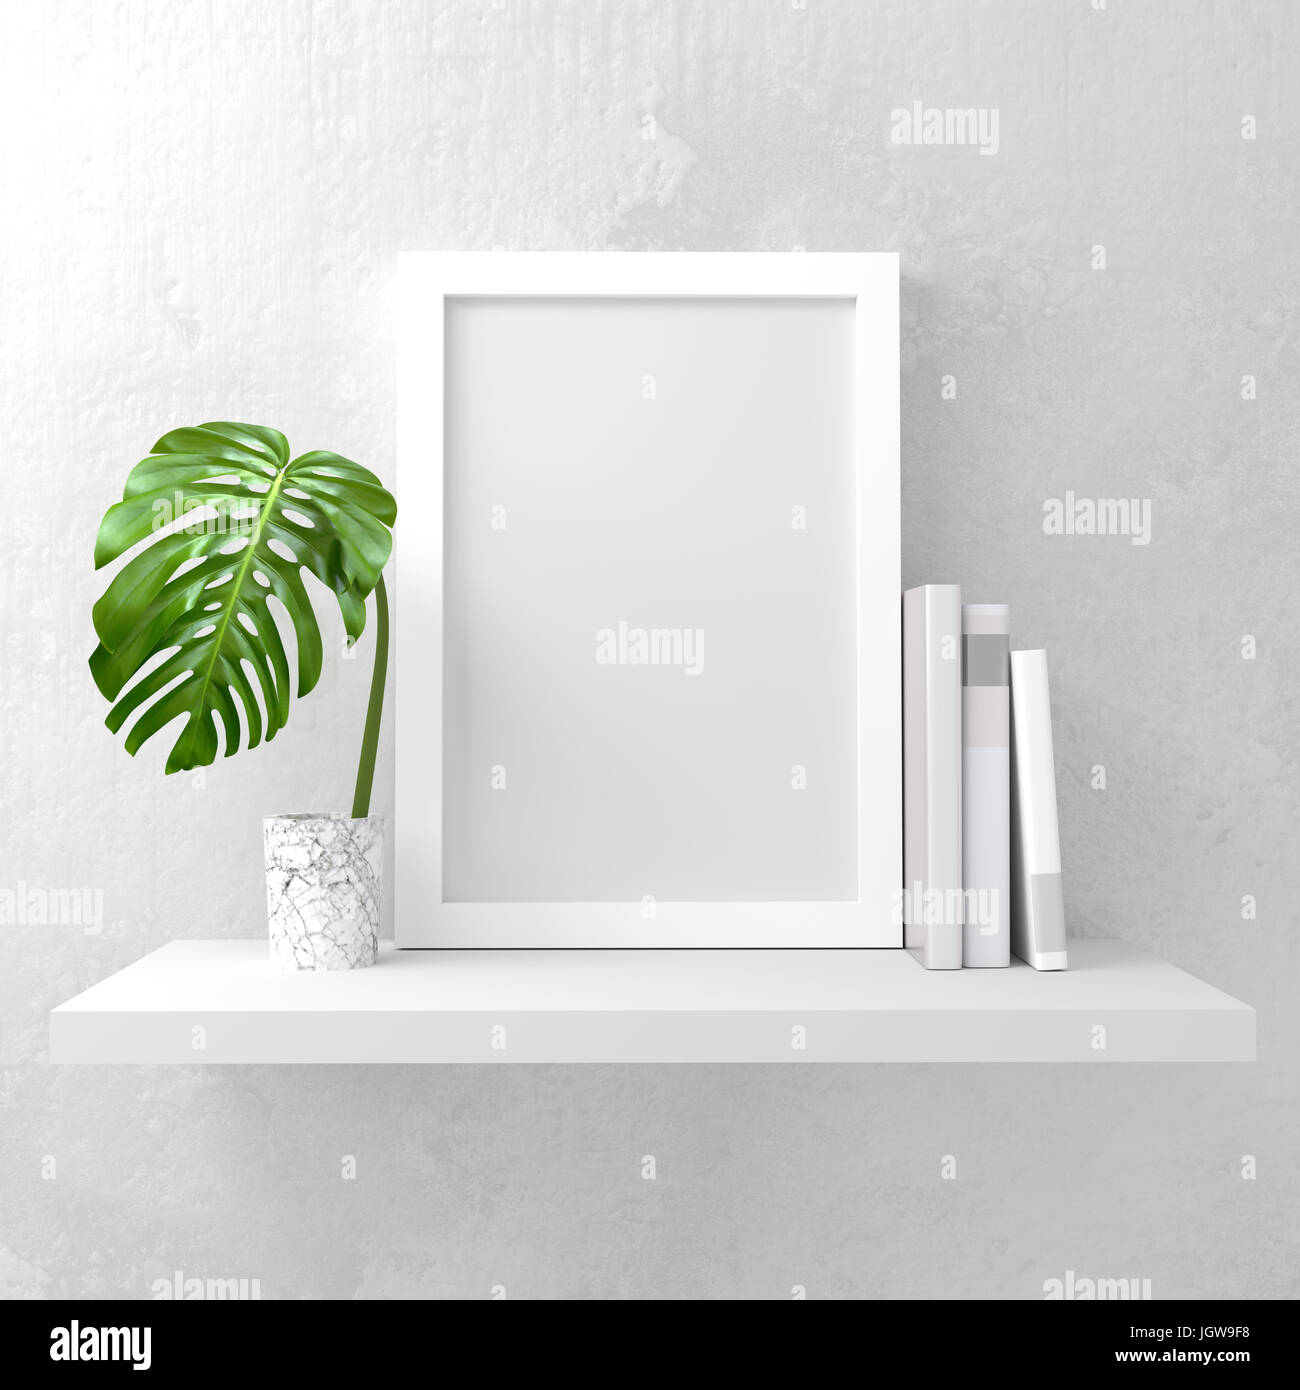 A photo frame mock up on a white shelf. Clean and minimal design. 3D render illustration Stock Photo